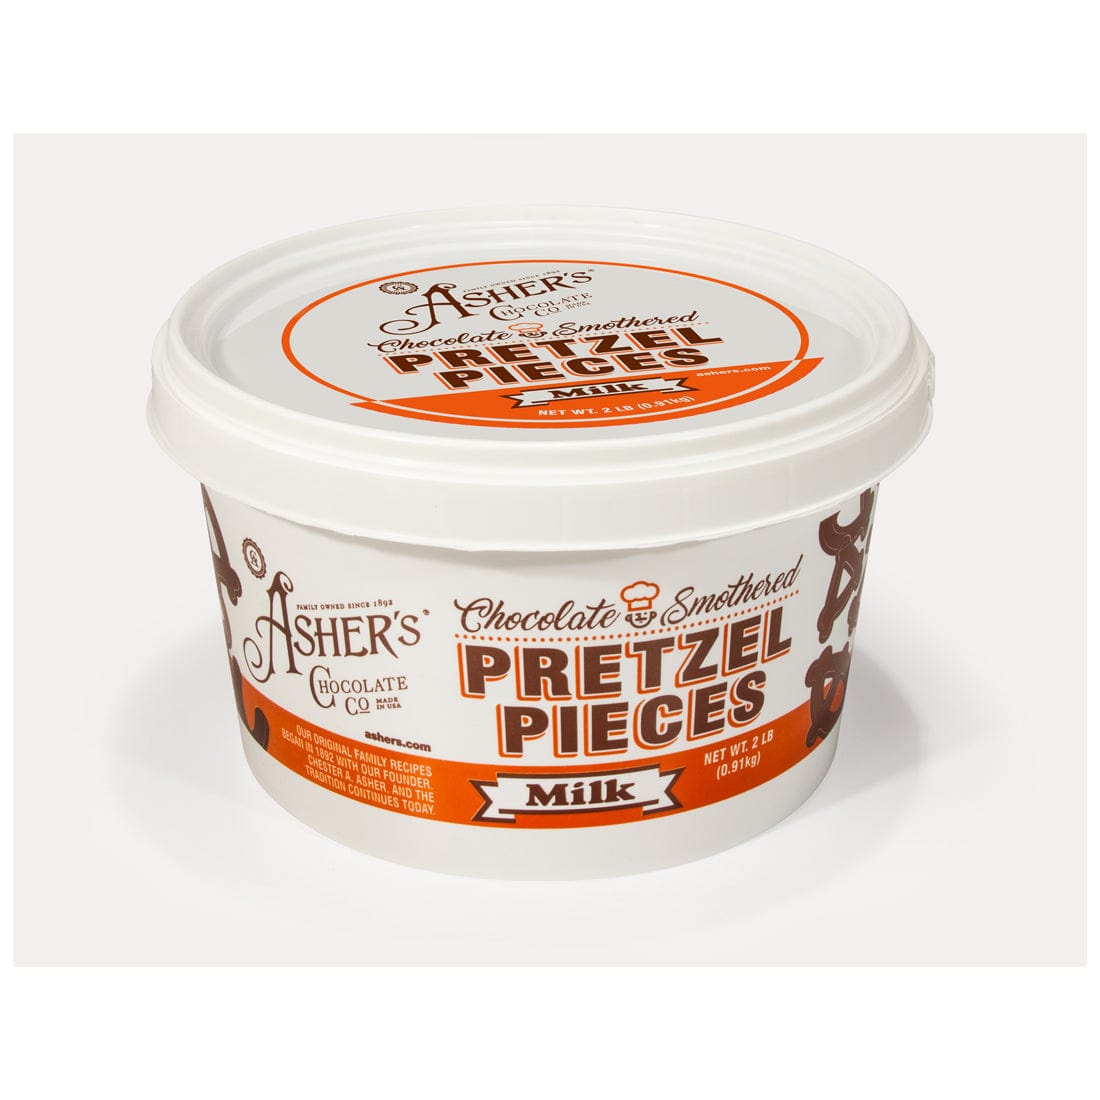 Asher's Chocolate Asher's Milk Chocolate Smothered Pretzel Pieces – 2 lb. Pail